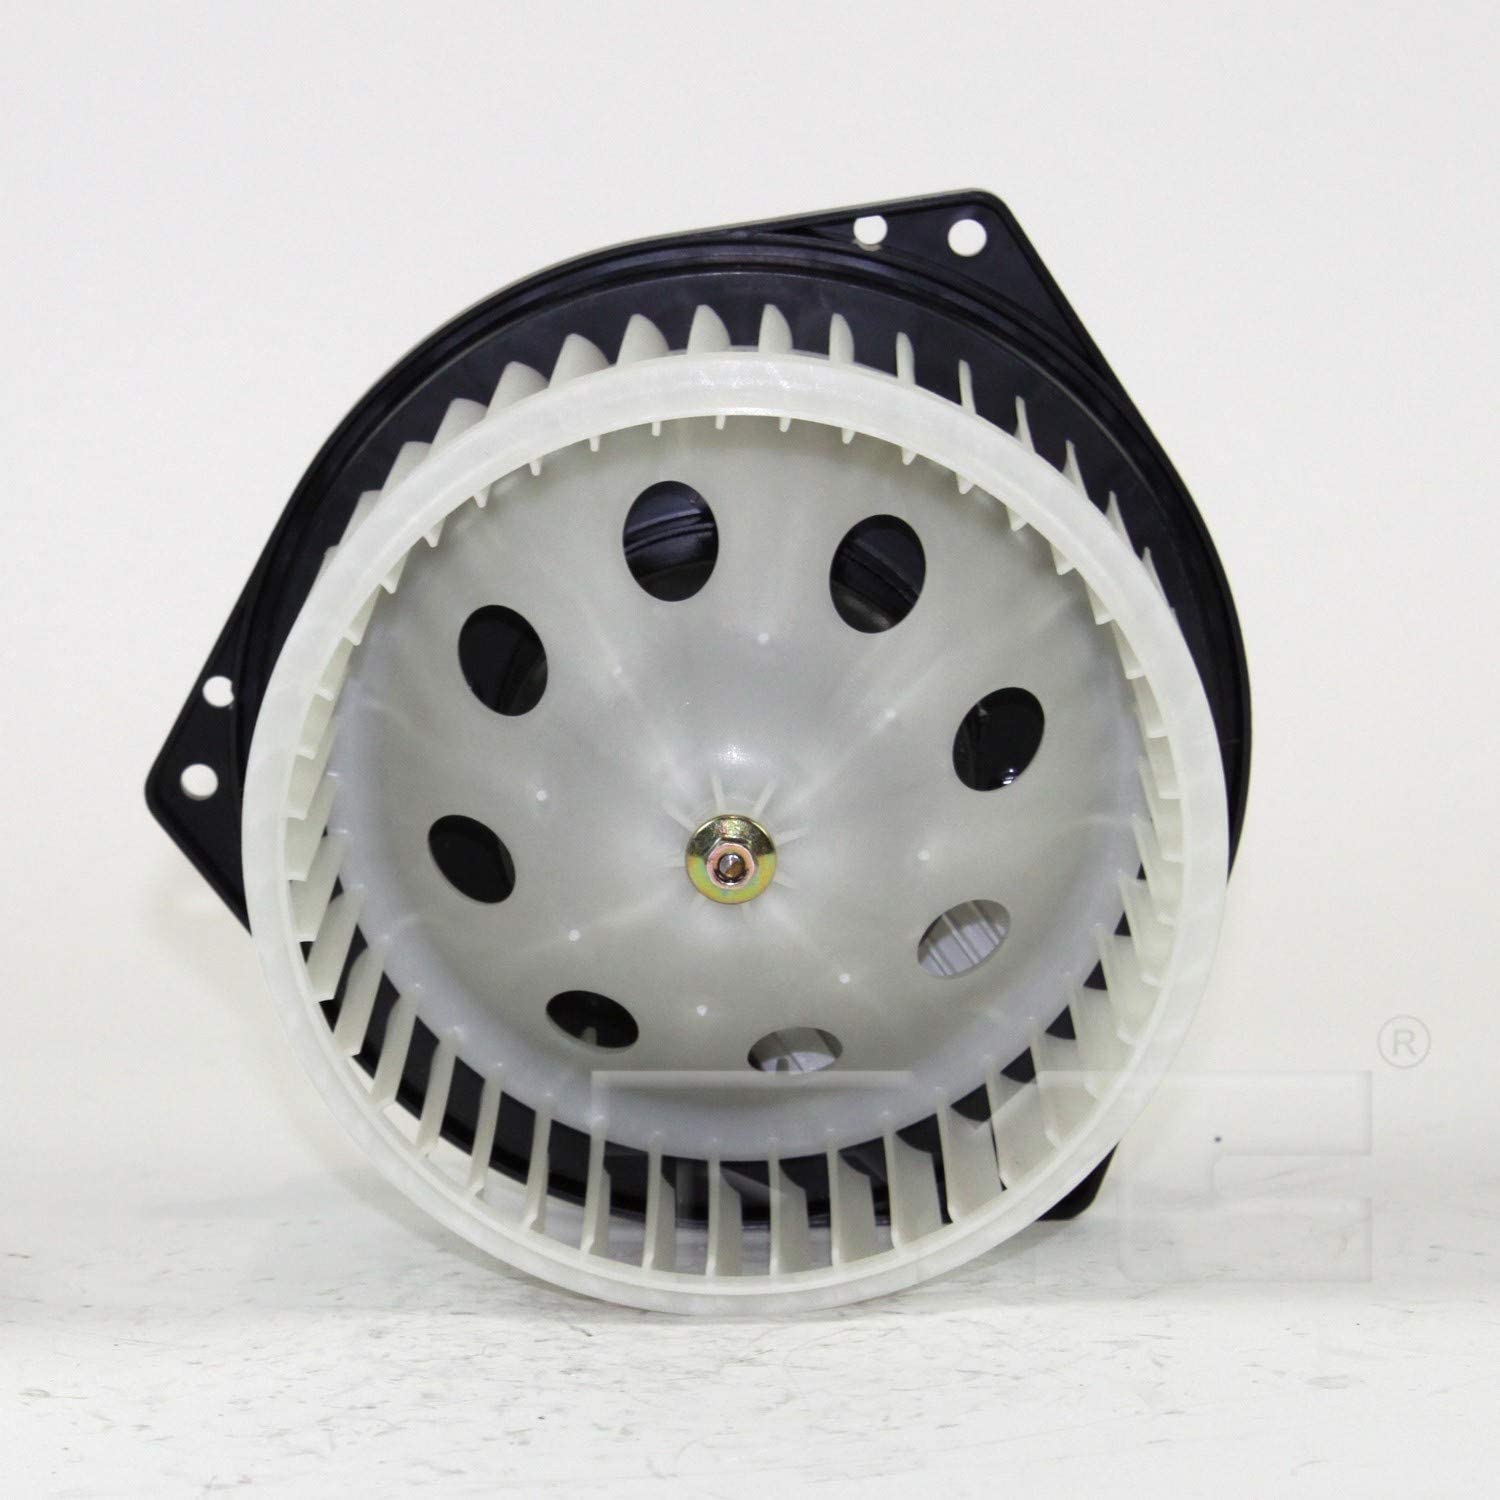 TYC - Front HVAC Blower Motor For 2004 Infiniti G35 - Premium Quanlity With One Year Warranty